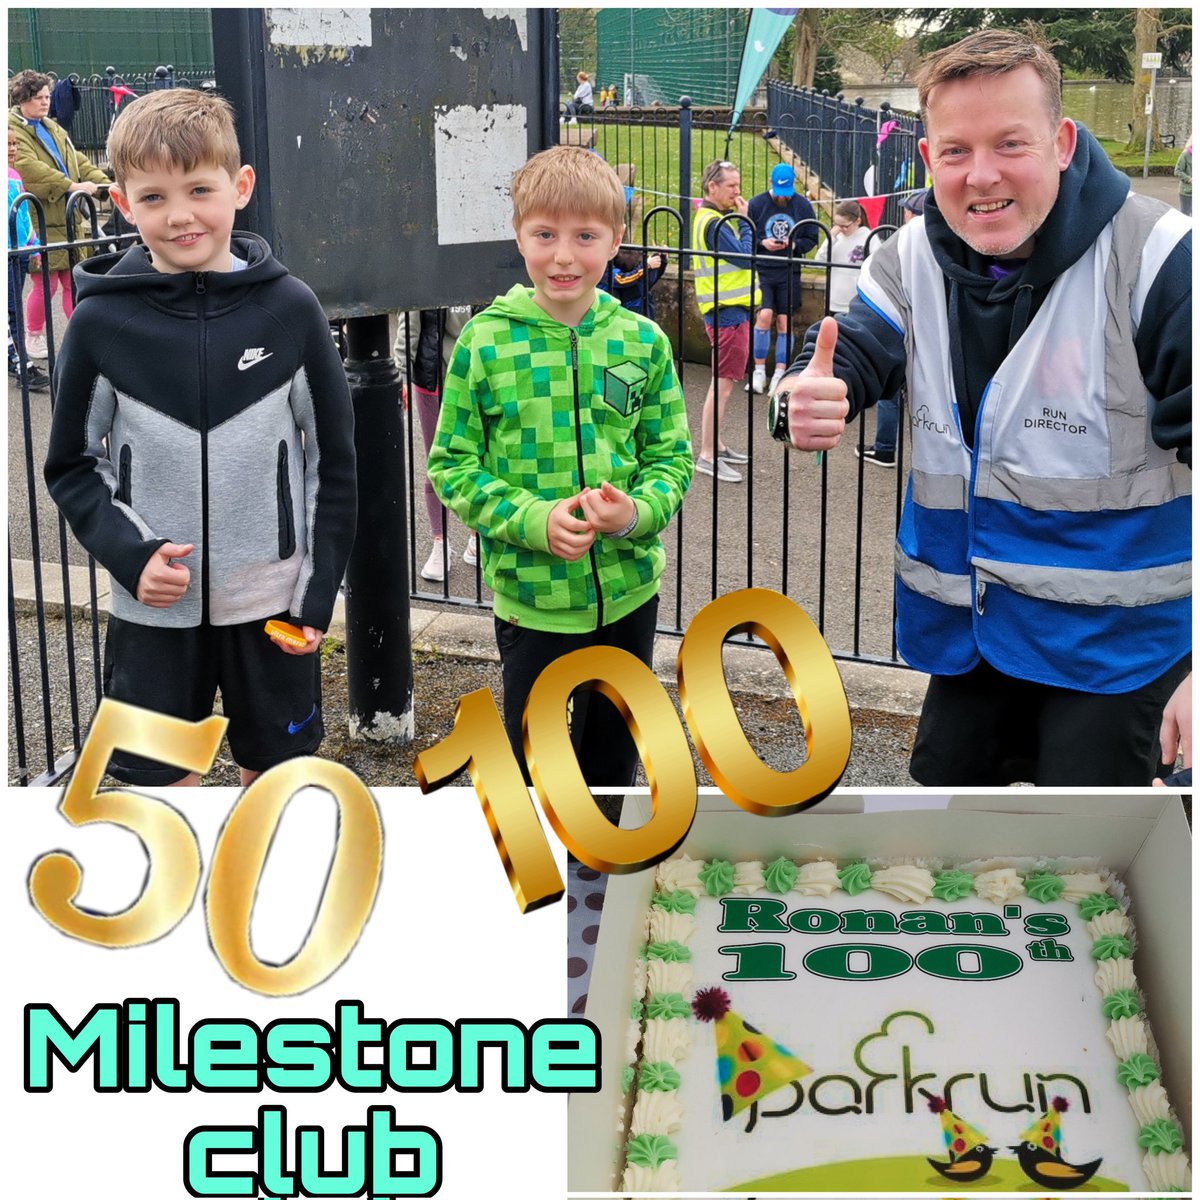 Well done to the newest members of our milestone clubs 👌💚👍 #loveparkrun #milestoneClub